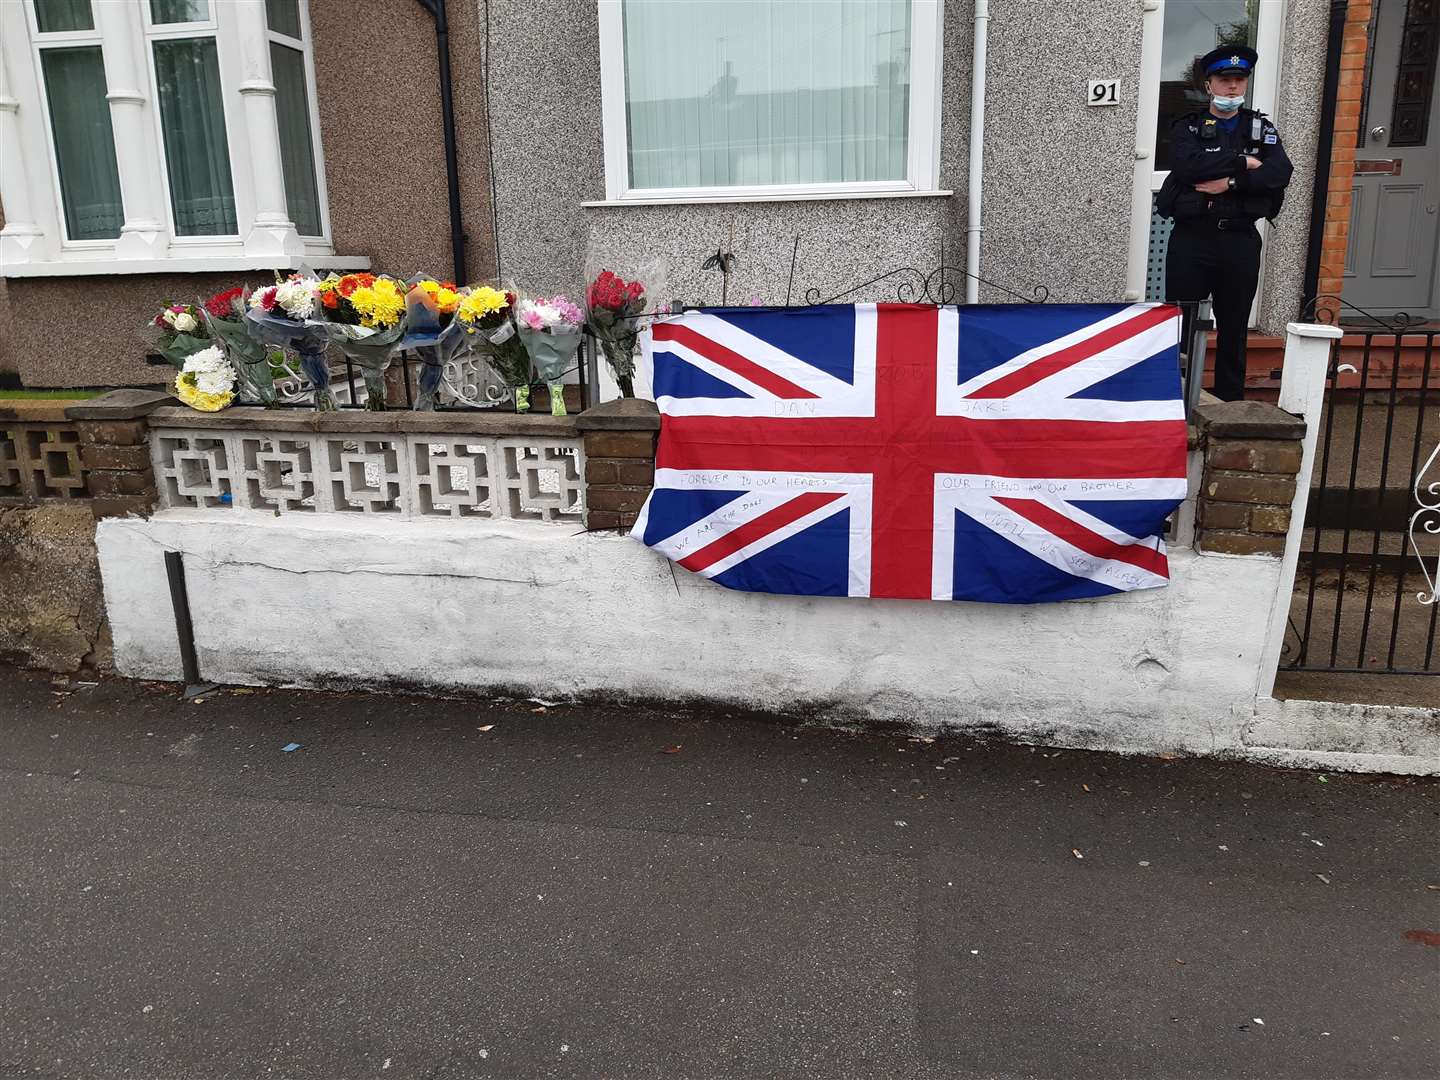 Floral tributes have been paid to Robert Williamson